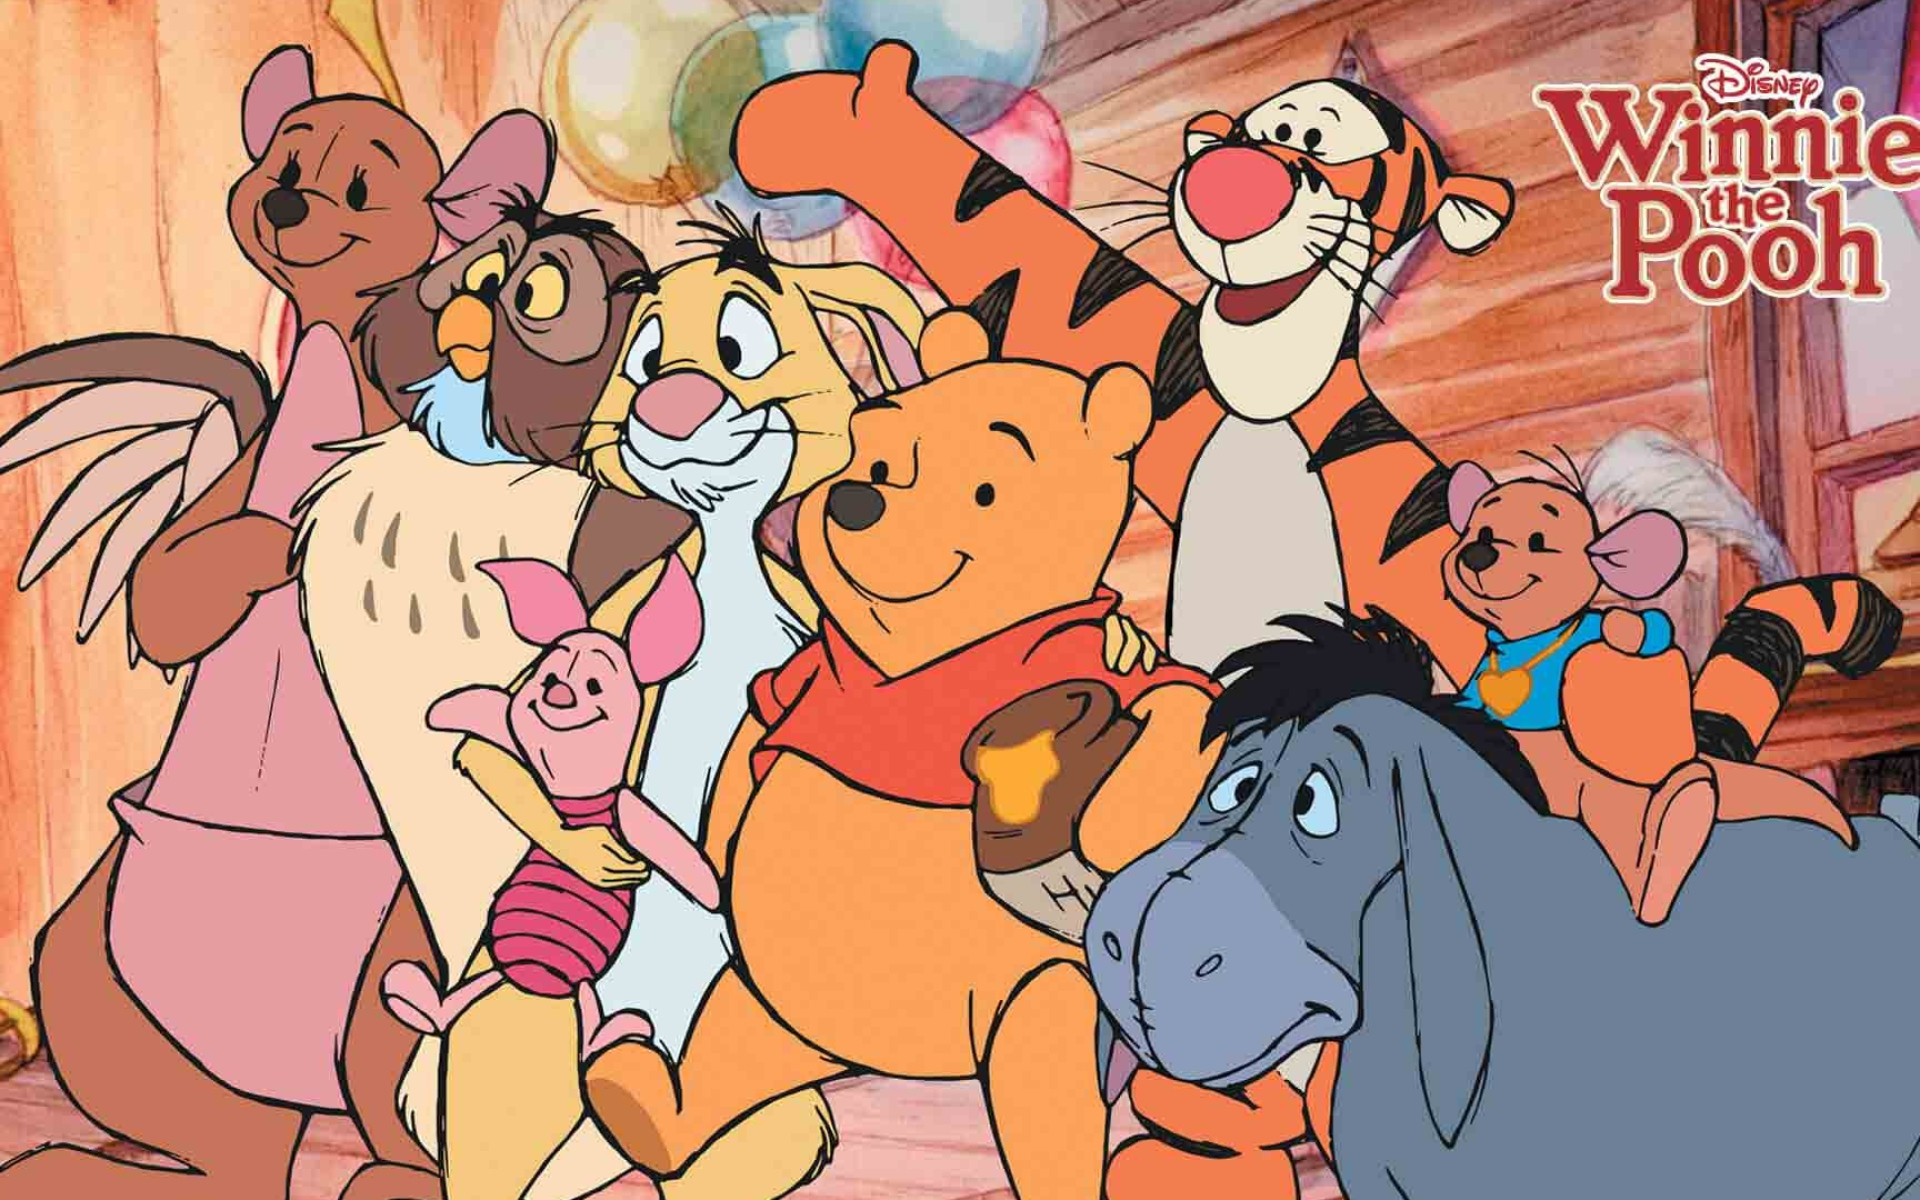 Piglet, Winnie the Pooh characters, Colorful wallpapers, Animated series, 1920x1200 HD Desktop